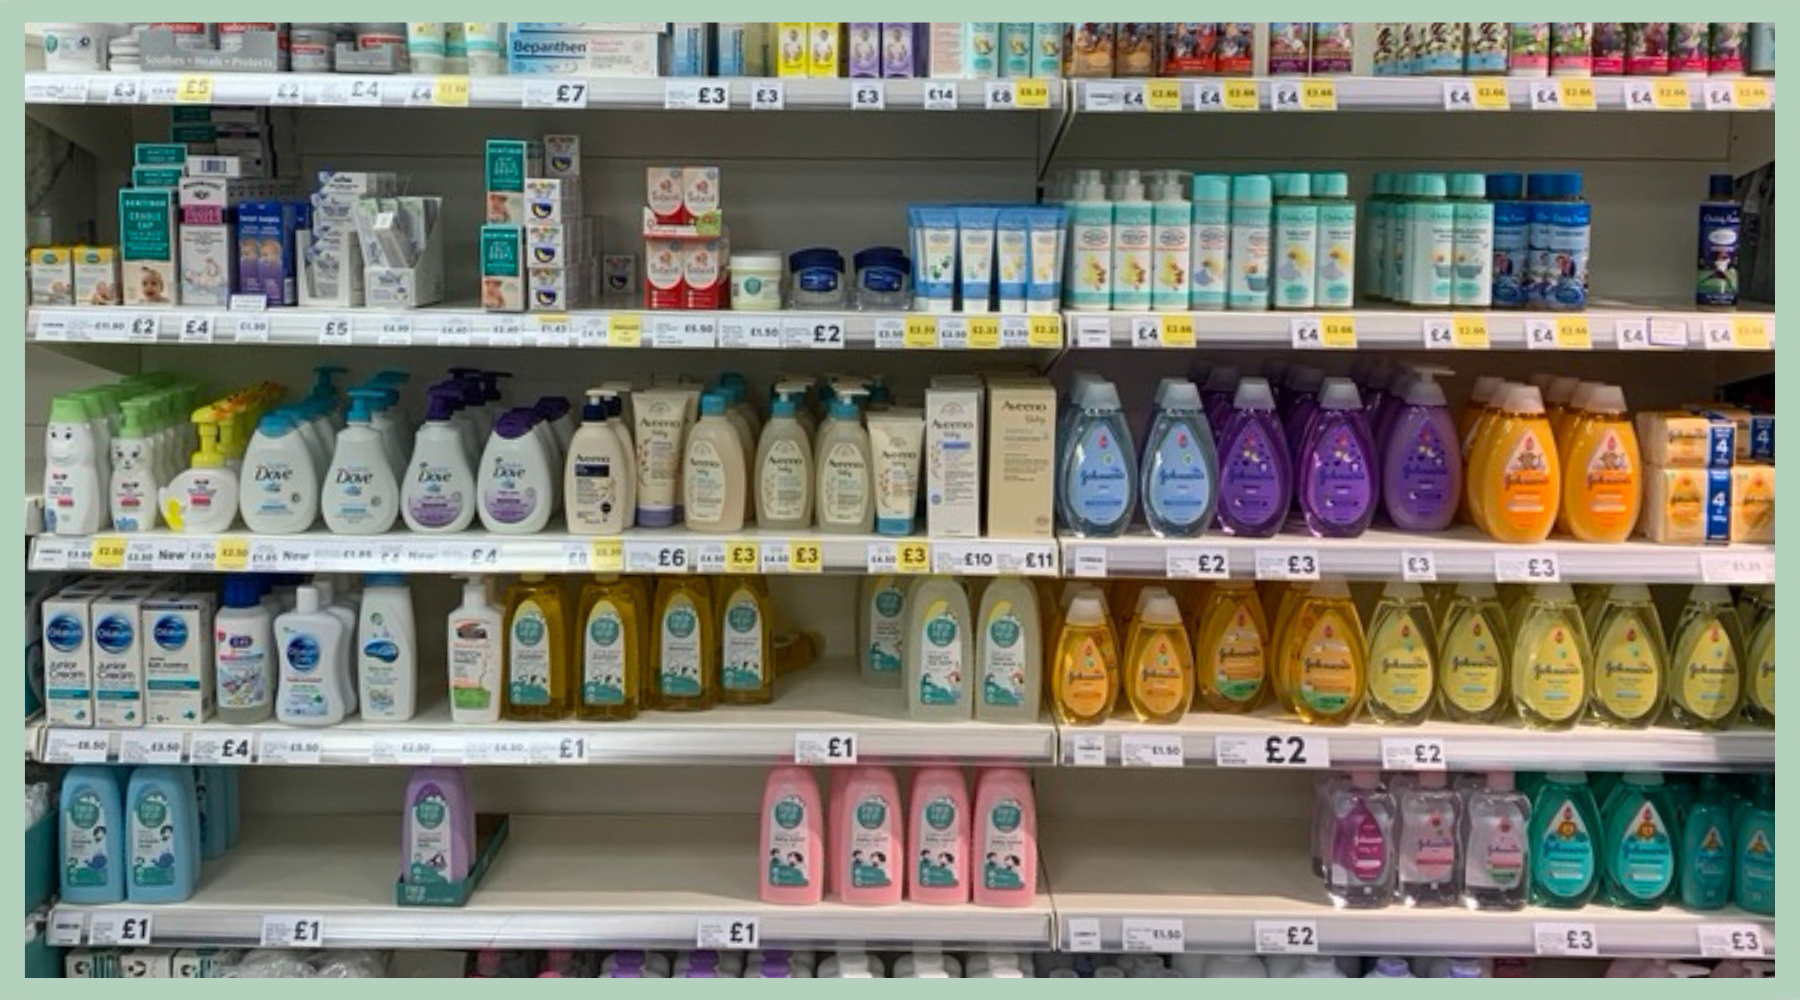 most babycare products continue to use plastic to make bottles at the expense of the environment